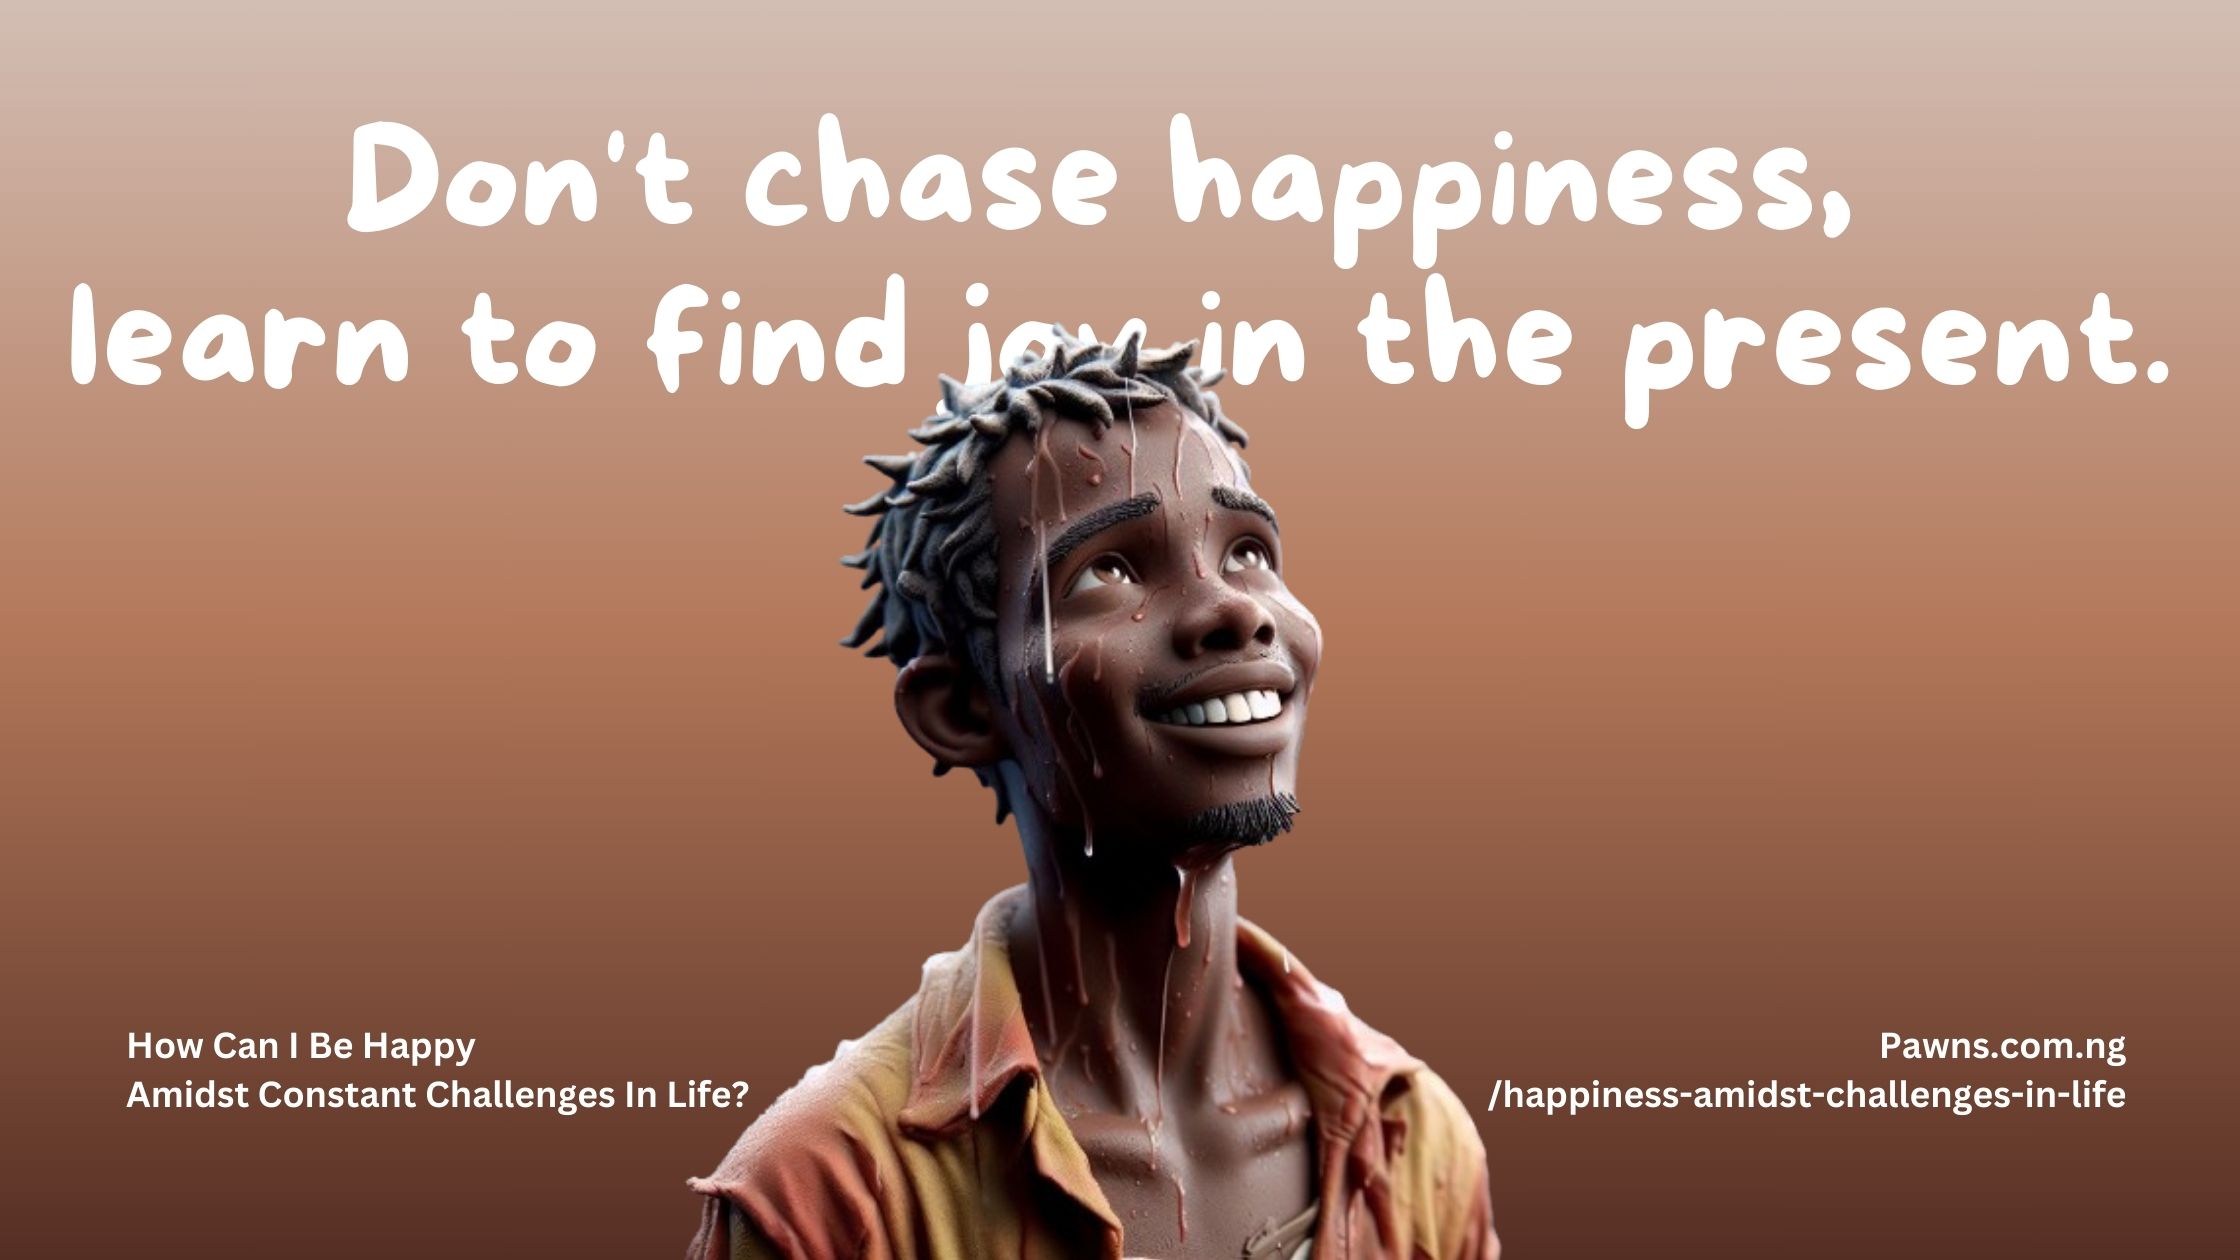 Don't chase happiness, learn to find joy in the present. How Can I Be Happy Amidst Constant Challenges In Life